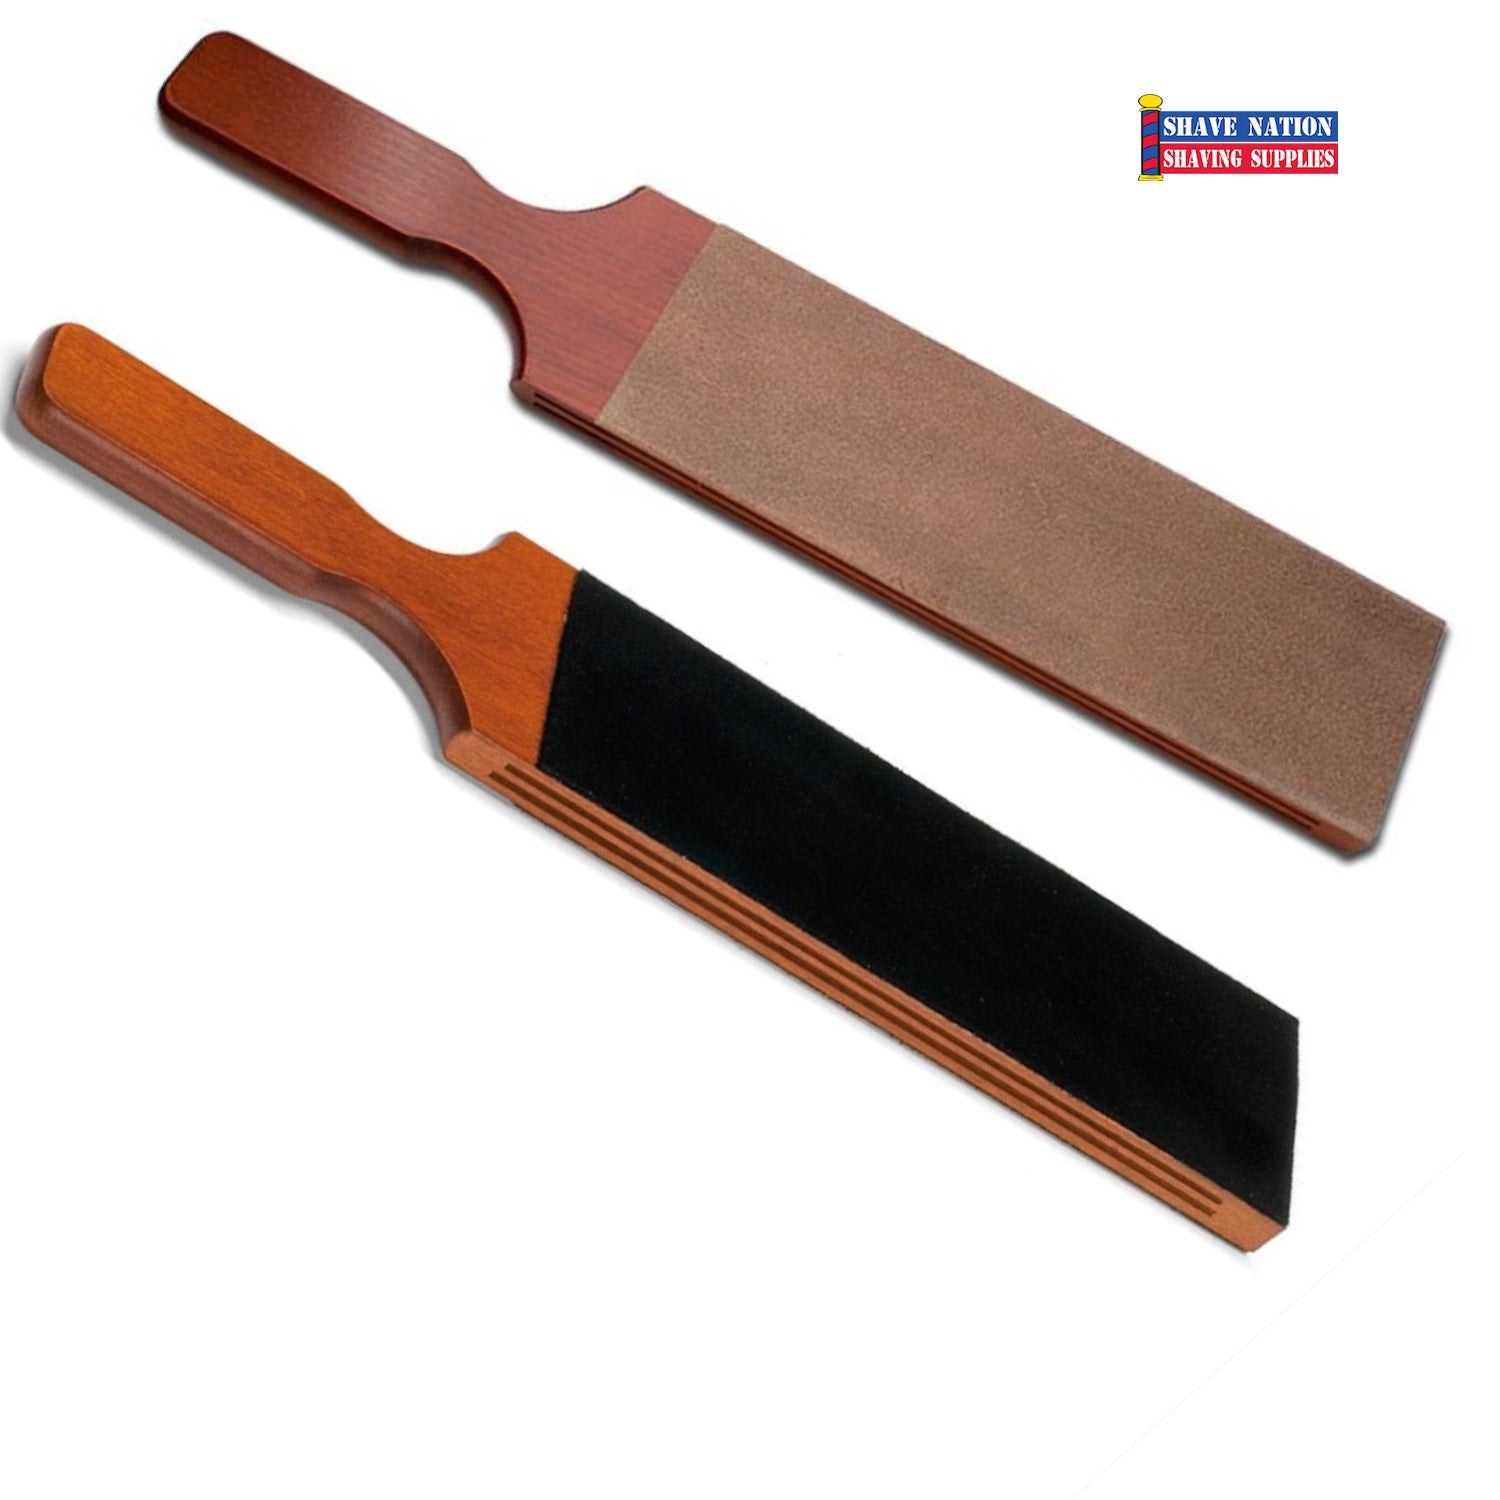 JRE Industries Strop Bat, Four-Sided Paddle Strop with Pre-Loaded